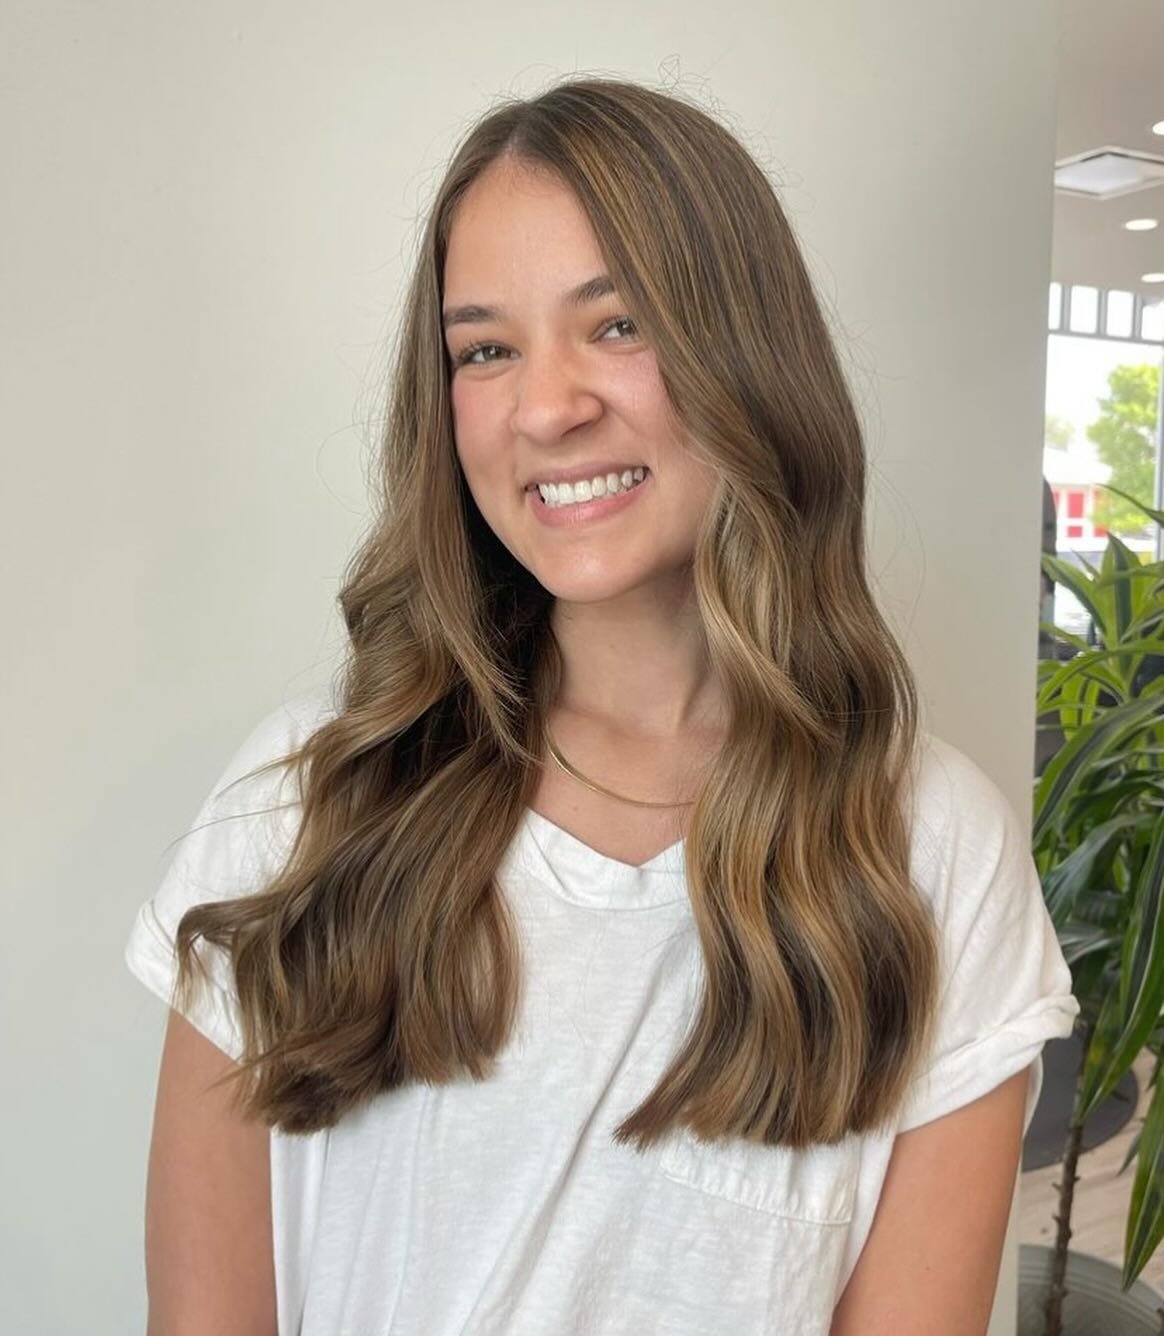 Completely refreshed and ready for summer 🌻 @hair.bykatie21 
.
@neill @aveda 
.
.
.
.
.
#balayagerevolution #hairdying #avedapro #avedasalons #brunettebalayagehair #instabrunette #naturalbrunette #subtlebalayage #smudgeroot #modersalon #undiscovered